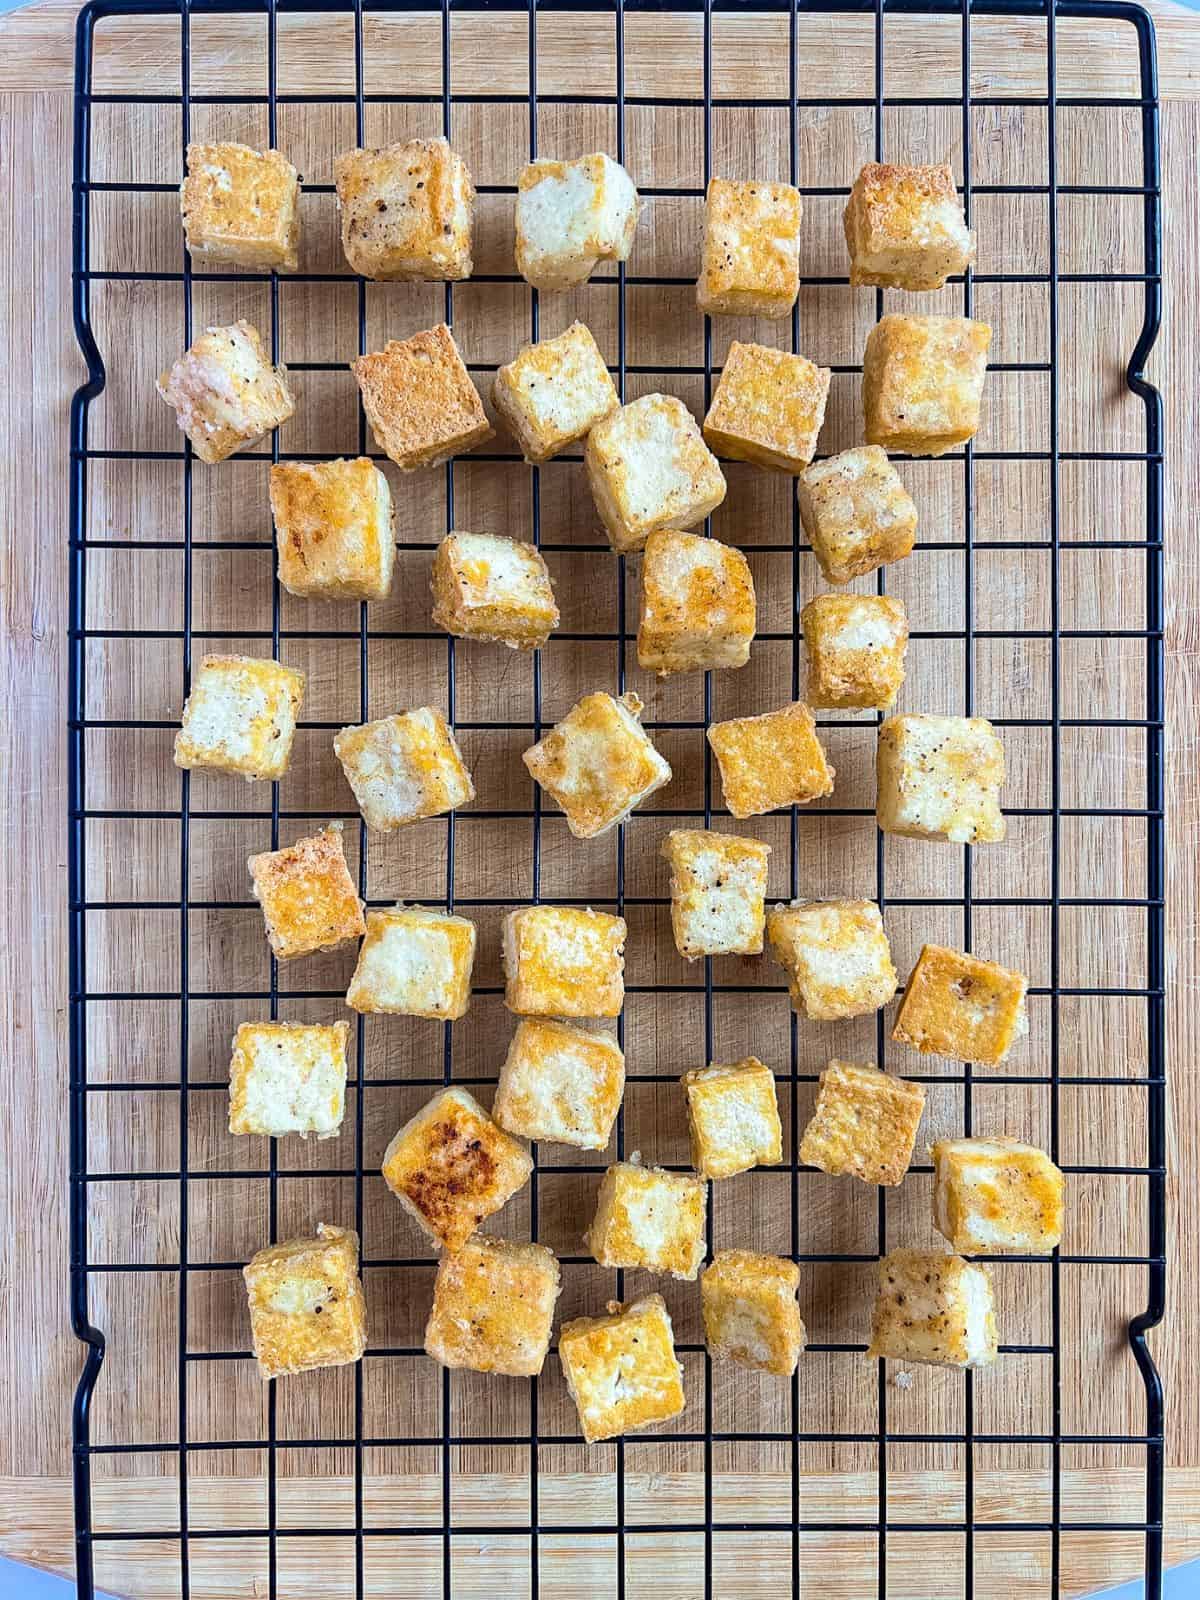 Fried tofu in a cooling wire rack.